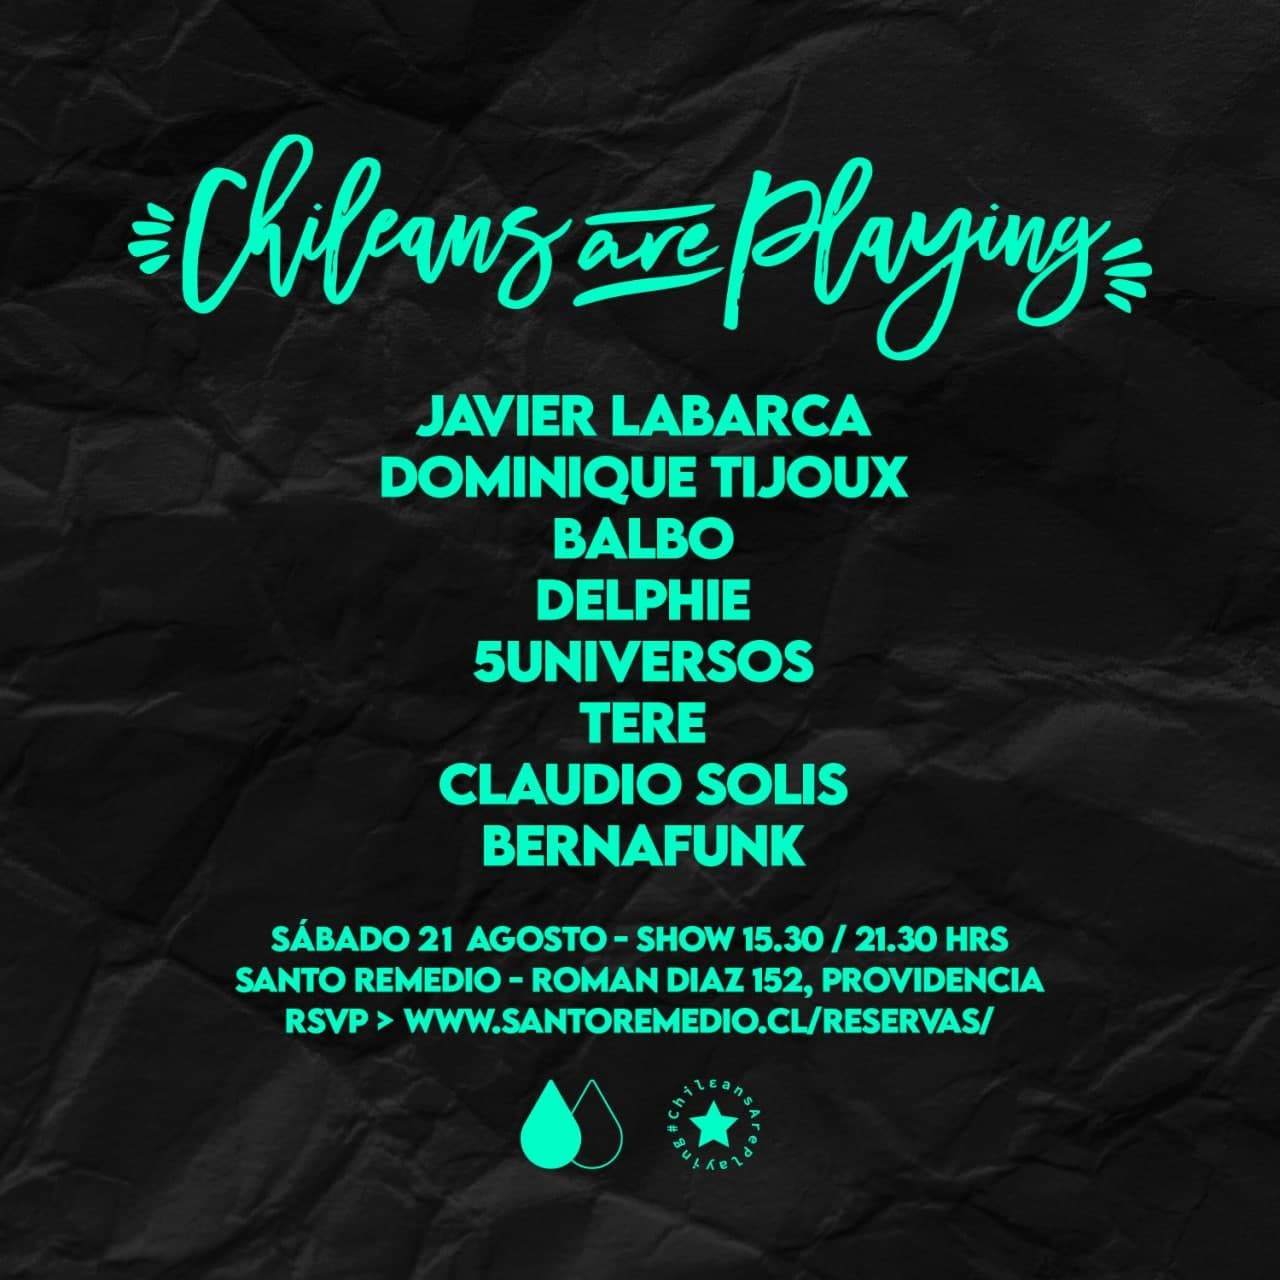 Chileansareplaying Agua y Sed Showcase 12años - フライヤー裏